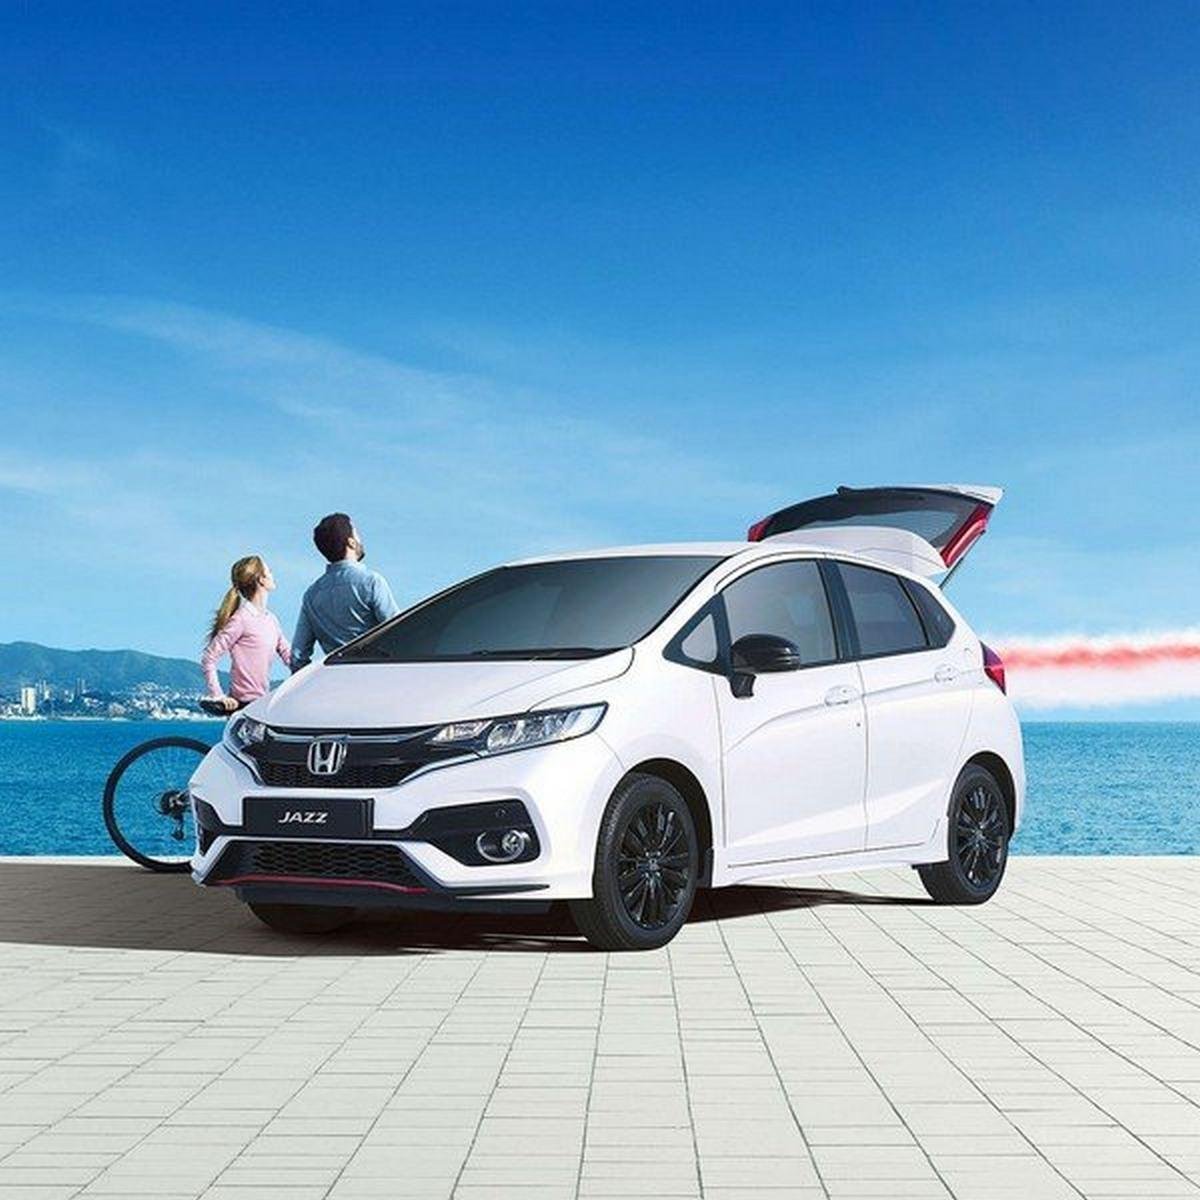 Honda Jazz Sport 2018 with family outdoor background